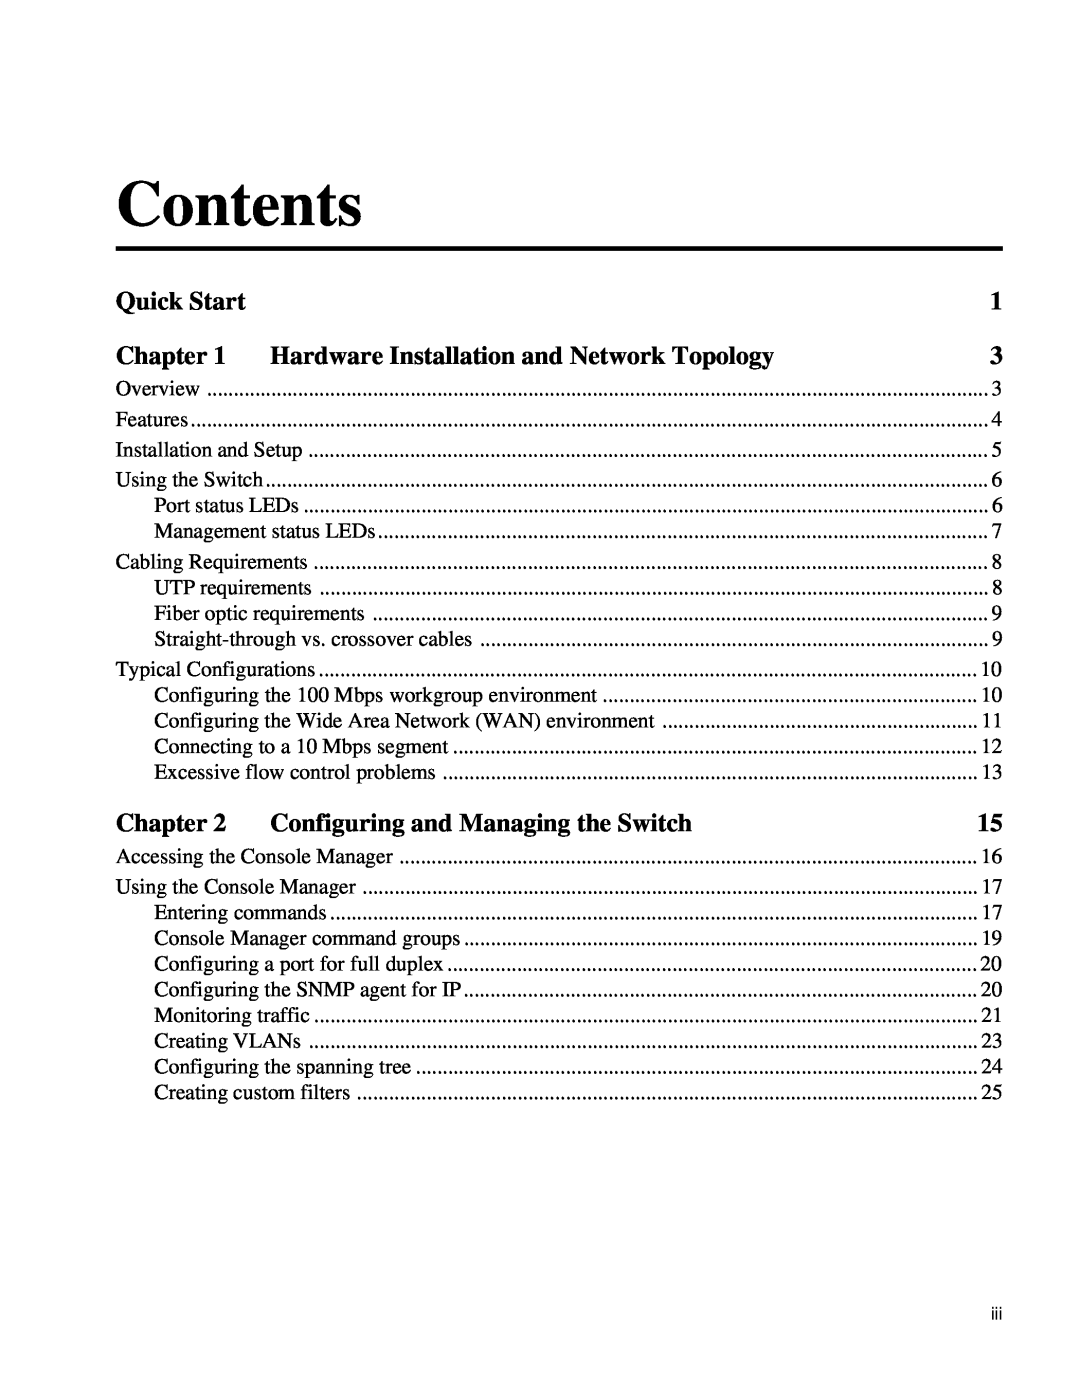 Intel 654655-001 manual Contents, Quick Start, Chapter, Hardware Installation and Network Topology 